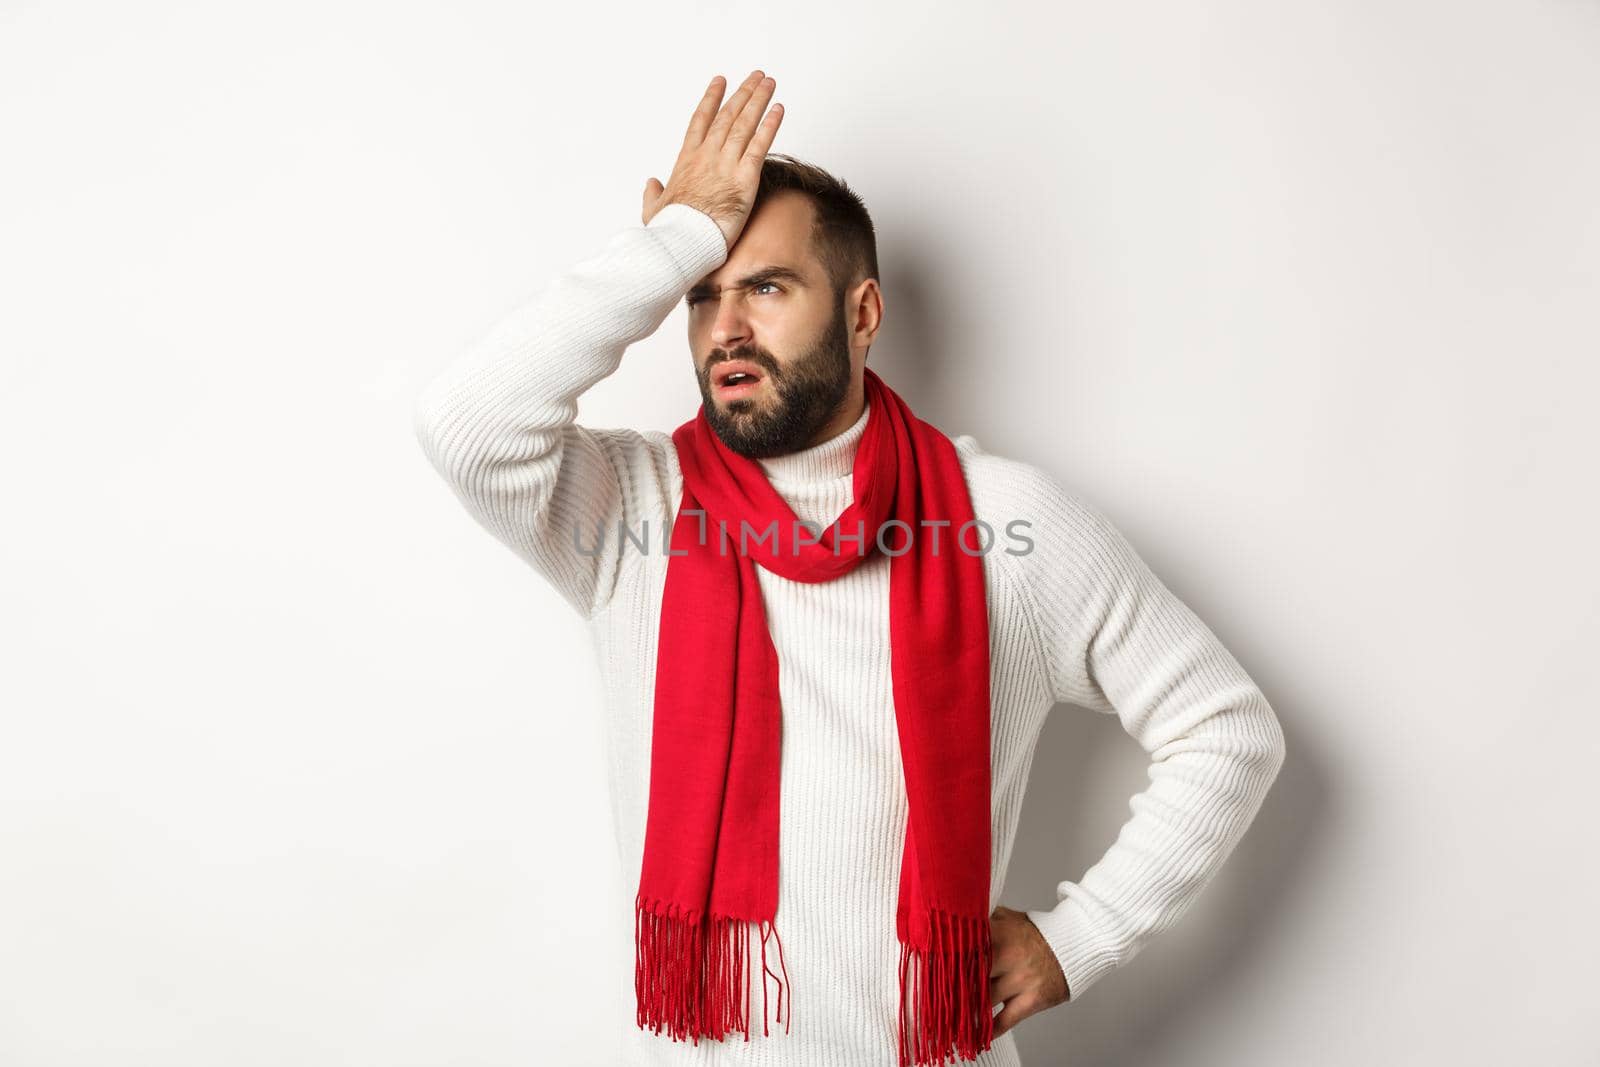 Annoyed man slap his forehead and cursing, forgetting buy christmas gifts, facepalm and standing bothered against white background.